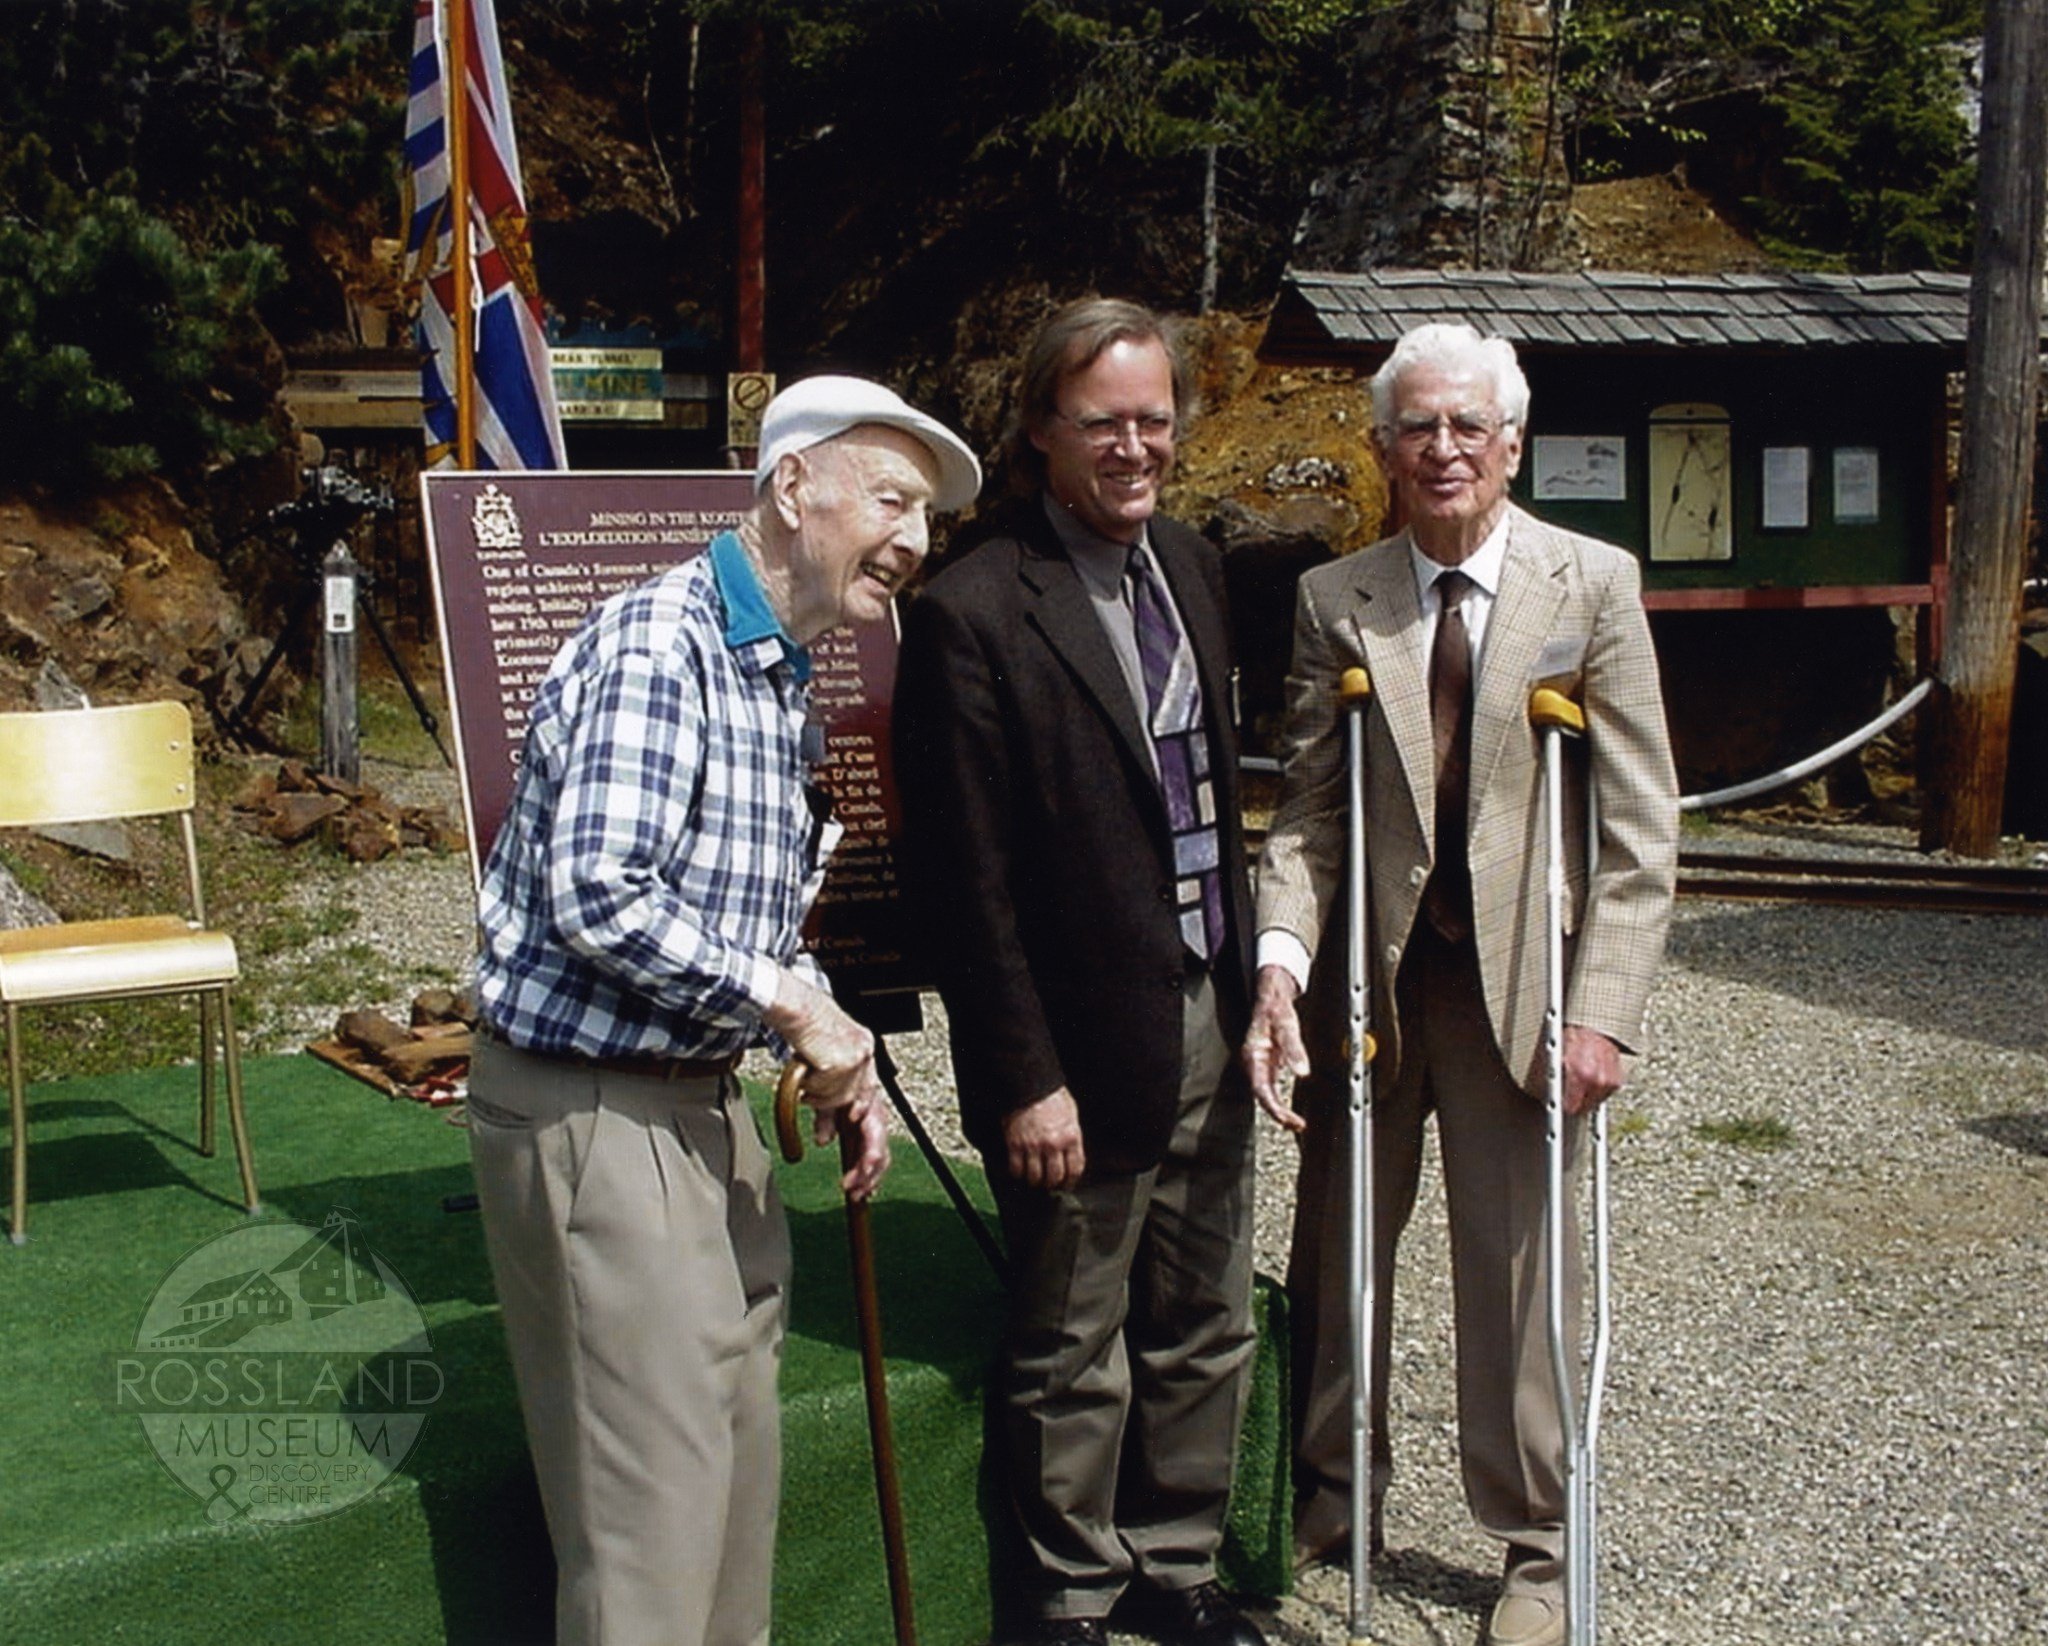 Did you know that the Rossland Museum &amp; Discovery Centre is located on the official Mining in the Kootenays National Historic Site? Today happens to be the International Day for Monuments and Sites! This photo from June 1st, 2002 of Jack McDonald